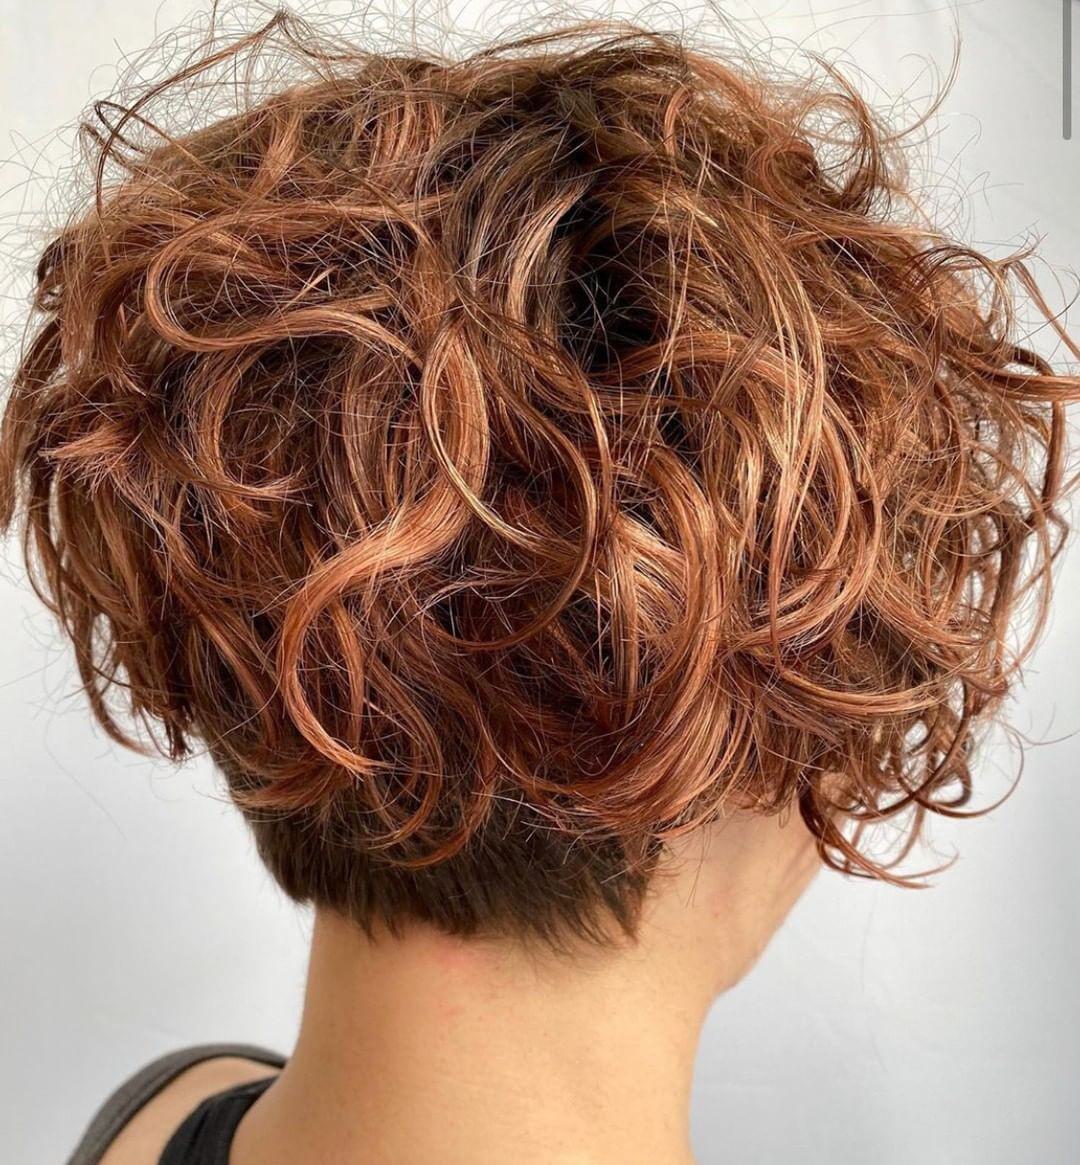 Curly Pixie Haircut: A Stylish and Edgy Choice